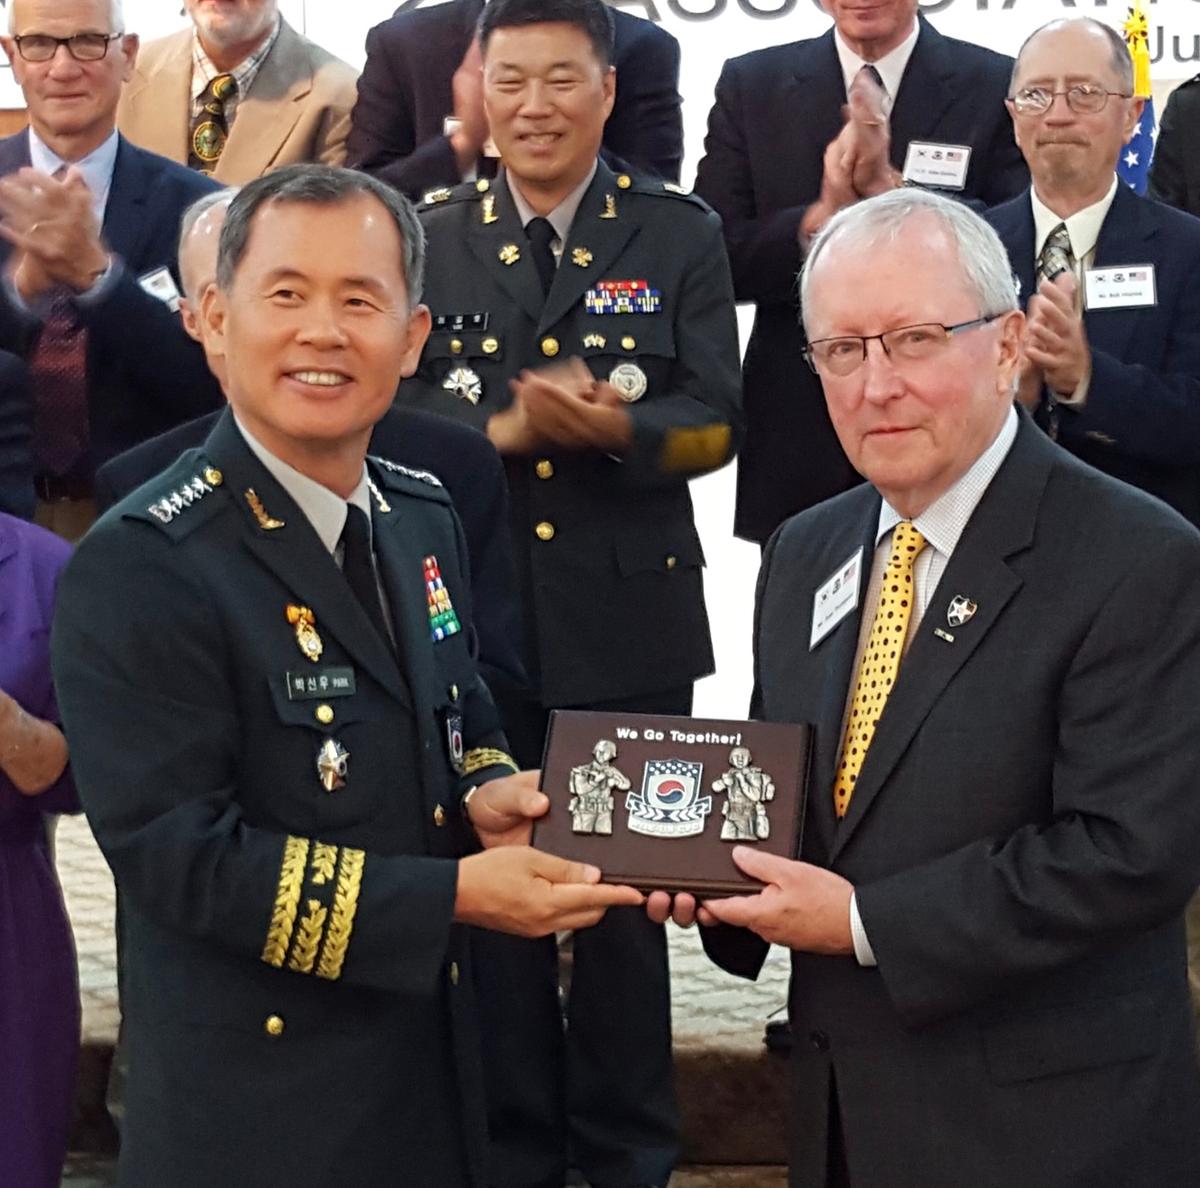 Aves Thompson receiving an award from the Deputy Commander of Combined Forces Command (CFC) of U.S. Forces Korea in 2015. (Courtesy of Aves)